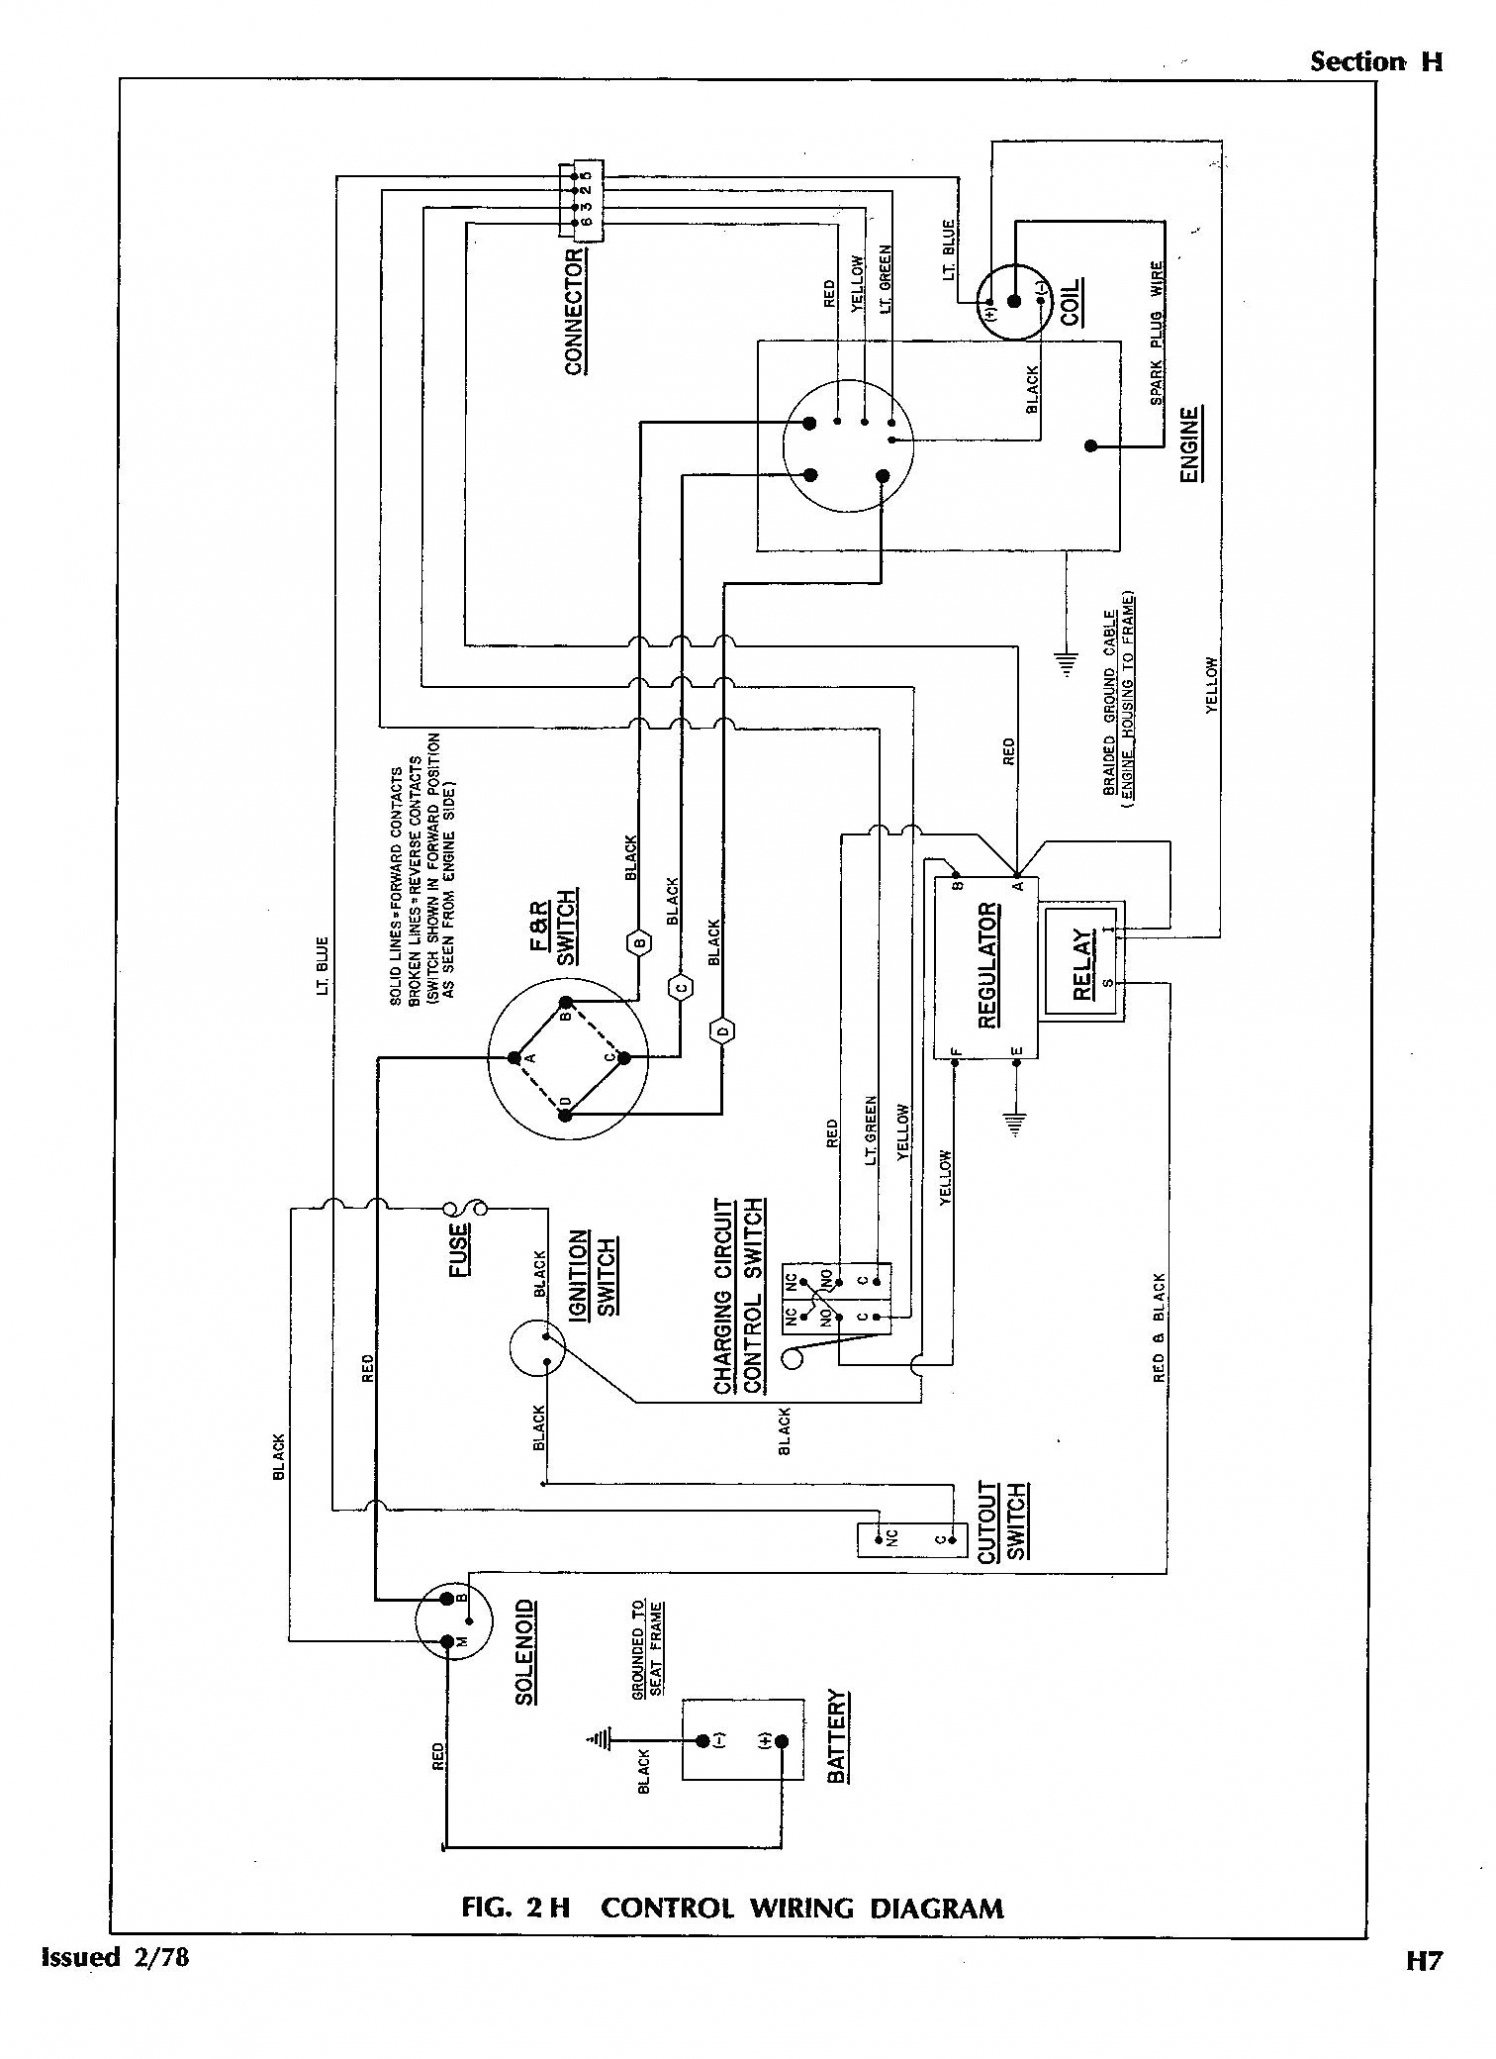 Wiring Diagram For A Golf Cart | Wiring Library - Golf Cart Solenoid Wiring Diagram